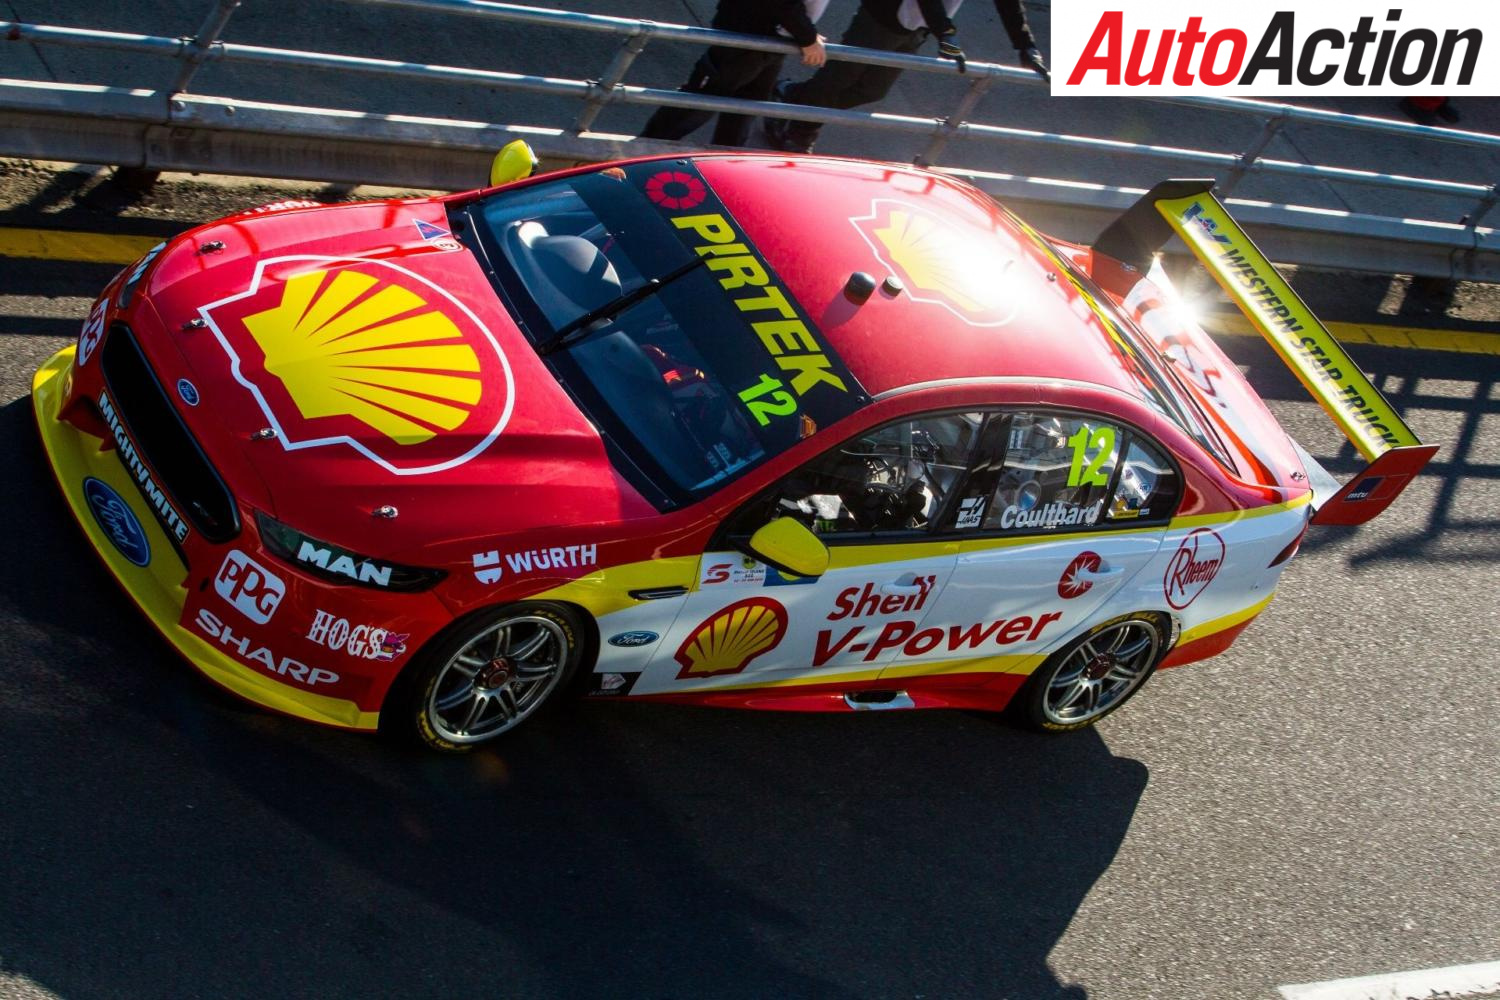 Fabian Coulthard believes teams have learnt from last year's tyre issues. Photo: LAT